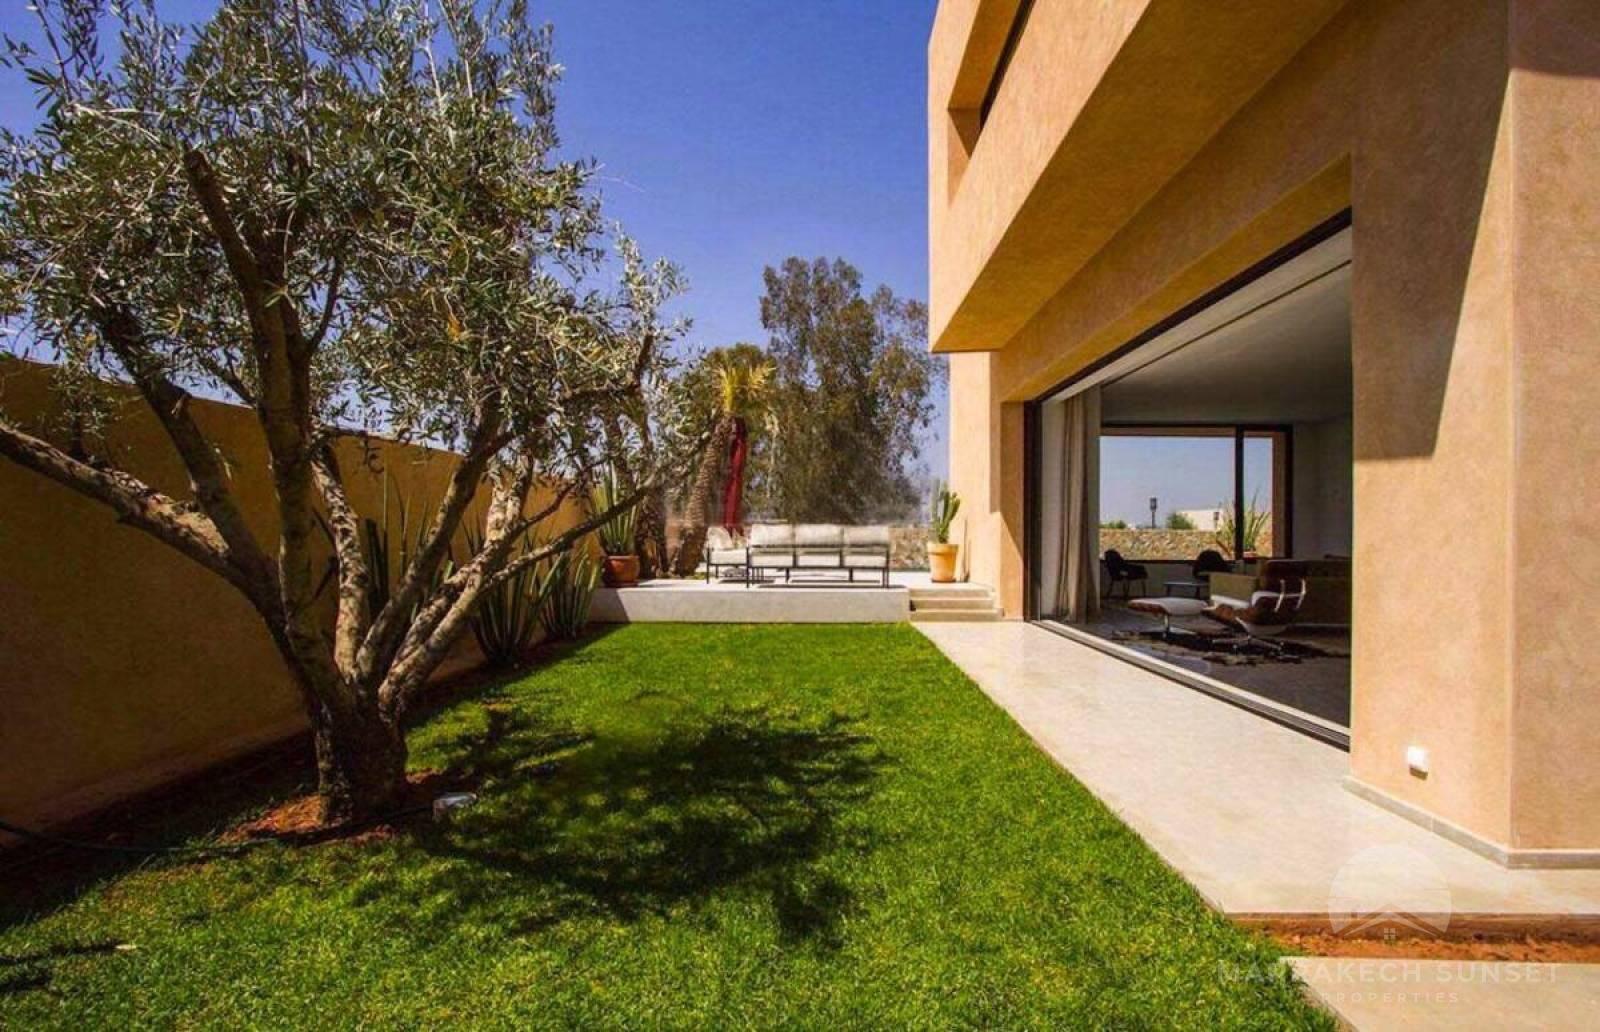 Modern Marrakech villa to Rent with pool in Amelkis golf club 